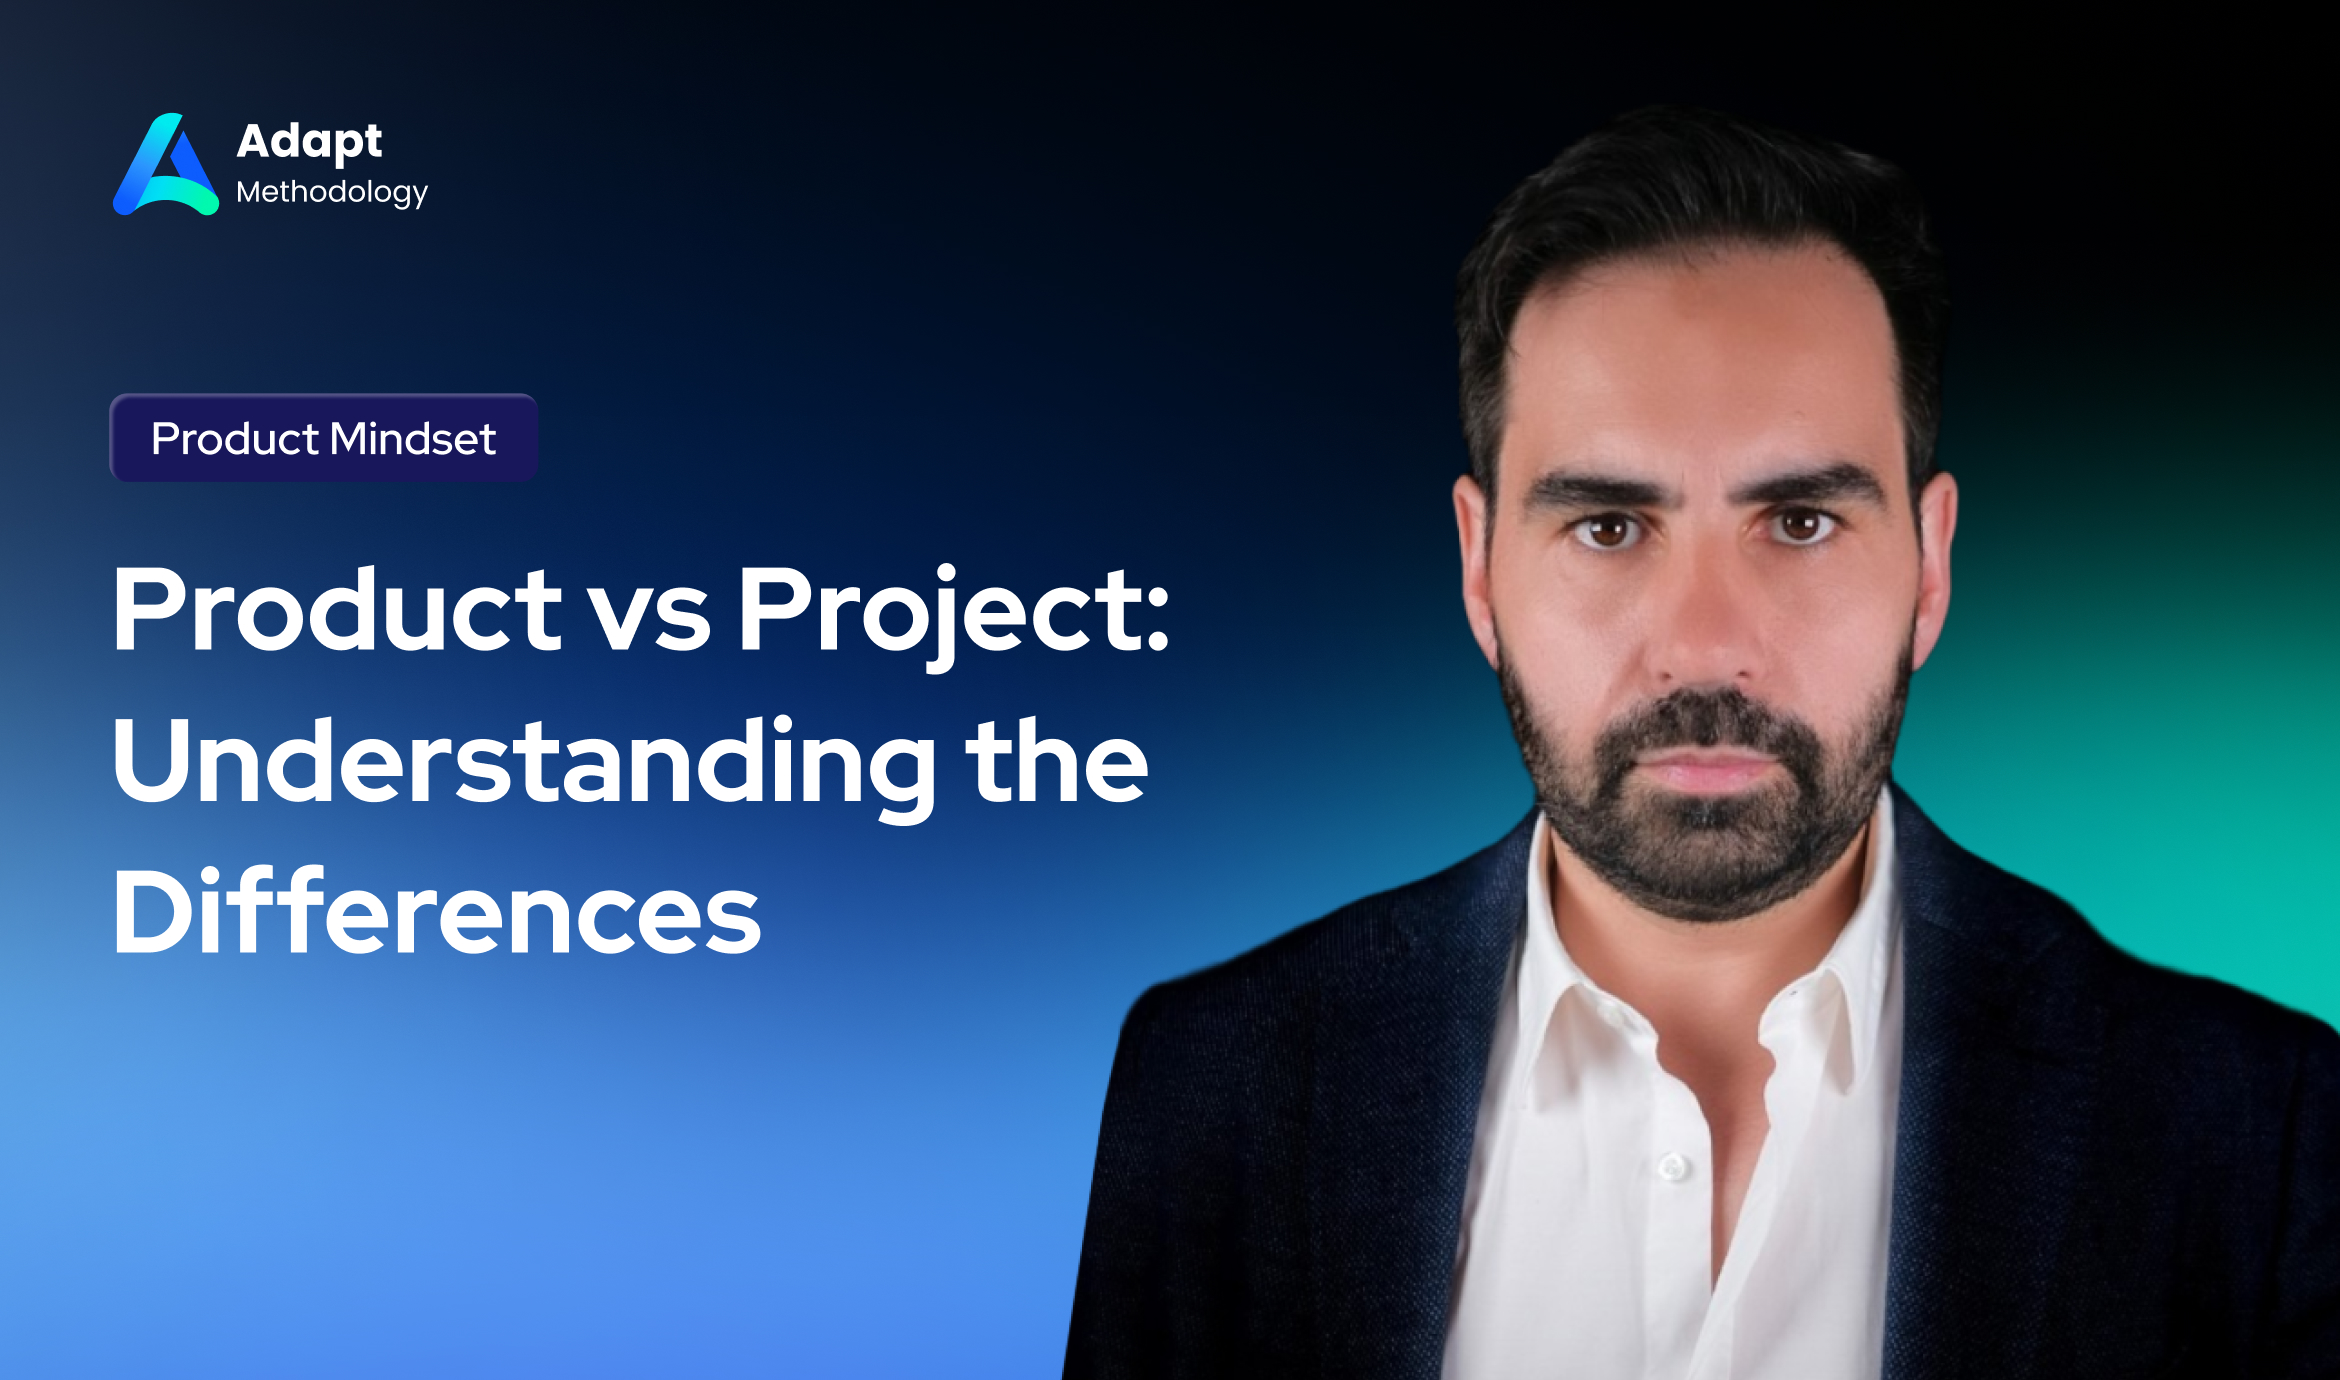 Product vs Project - Understanding the Differences